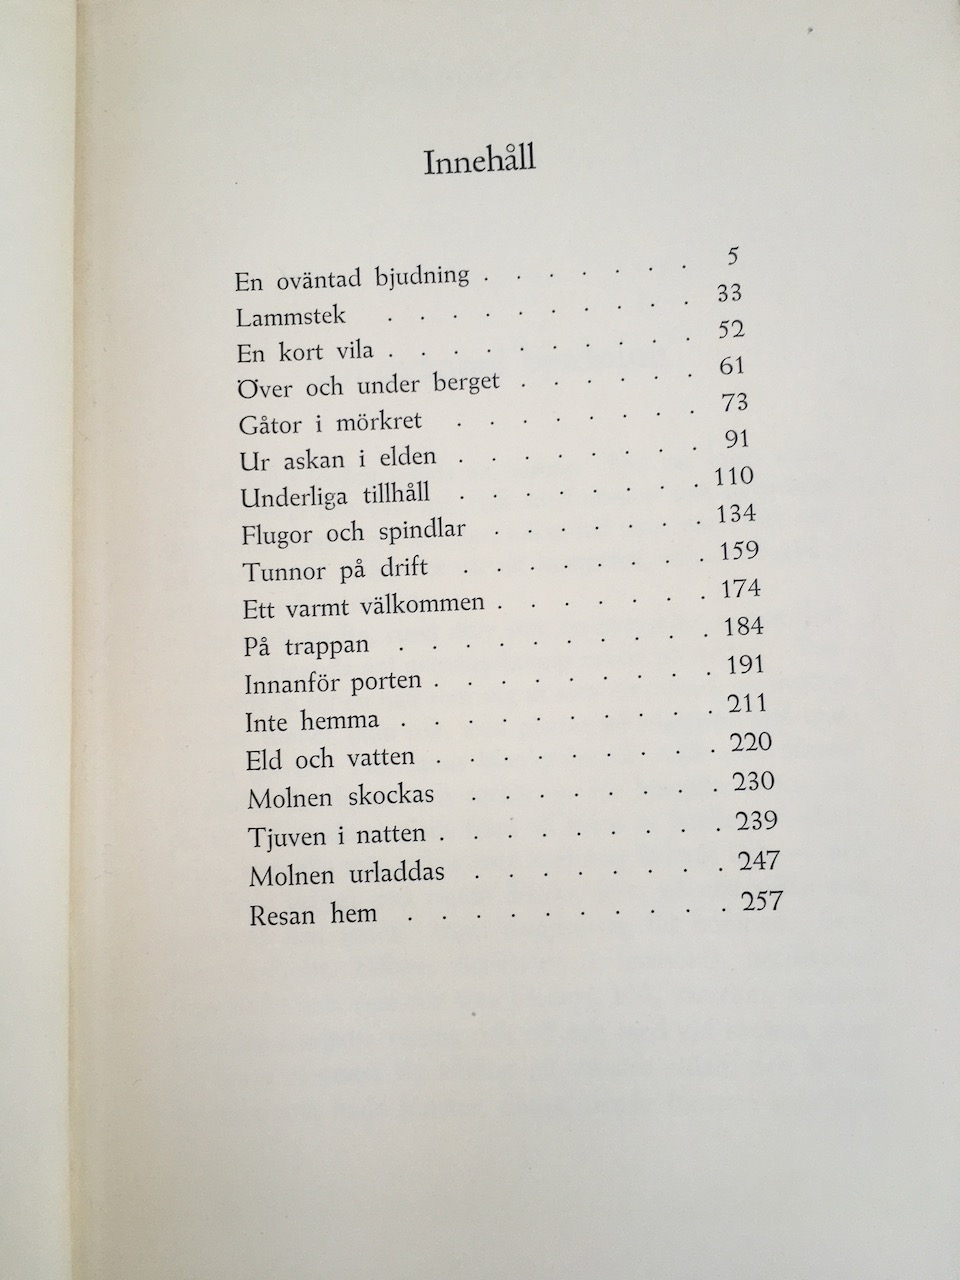 Hompen, 1947, first Swedish edition - first translation of The Hobbit into any language 17